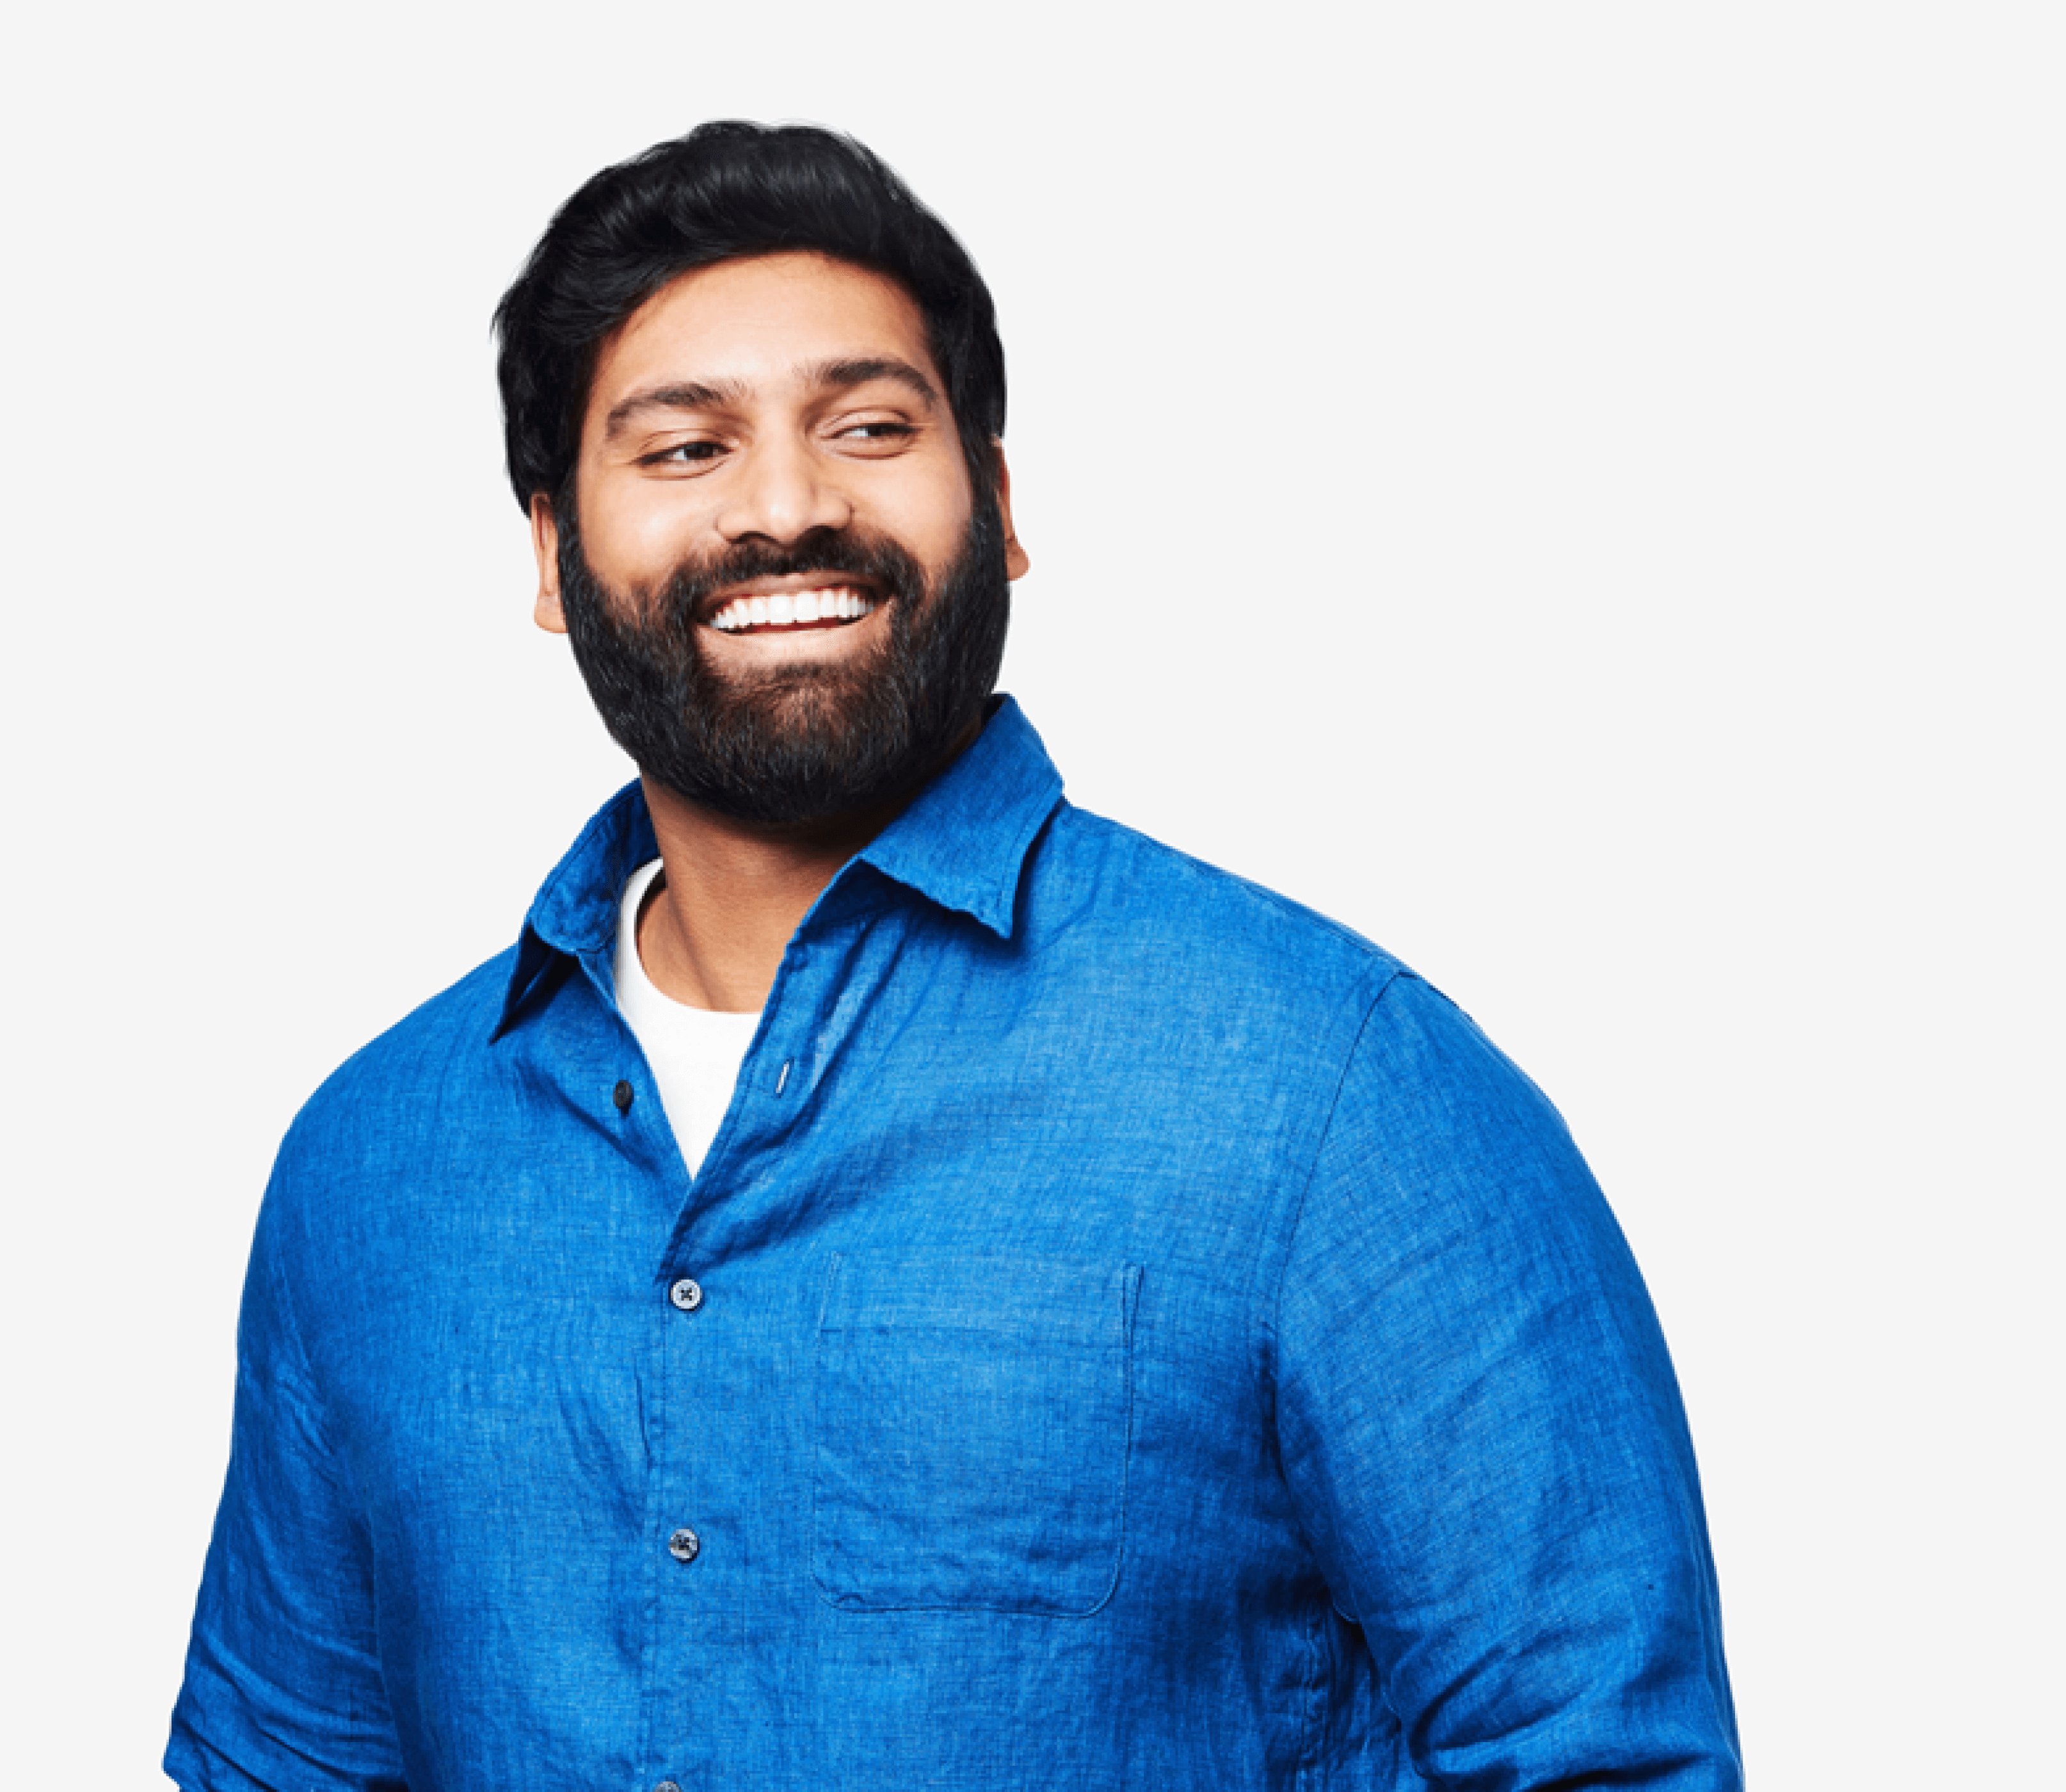 Smiling black haired man with beard and blue shirt looking to his left